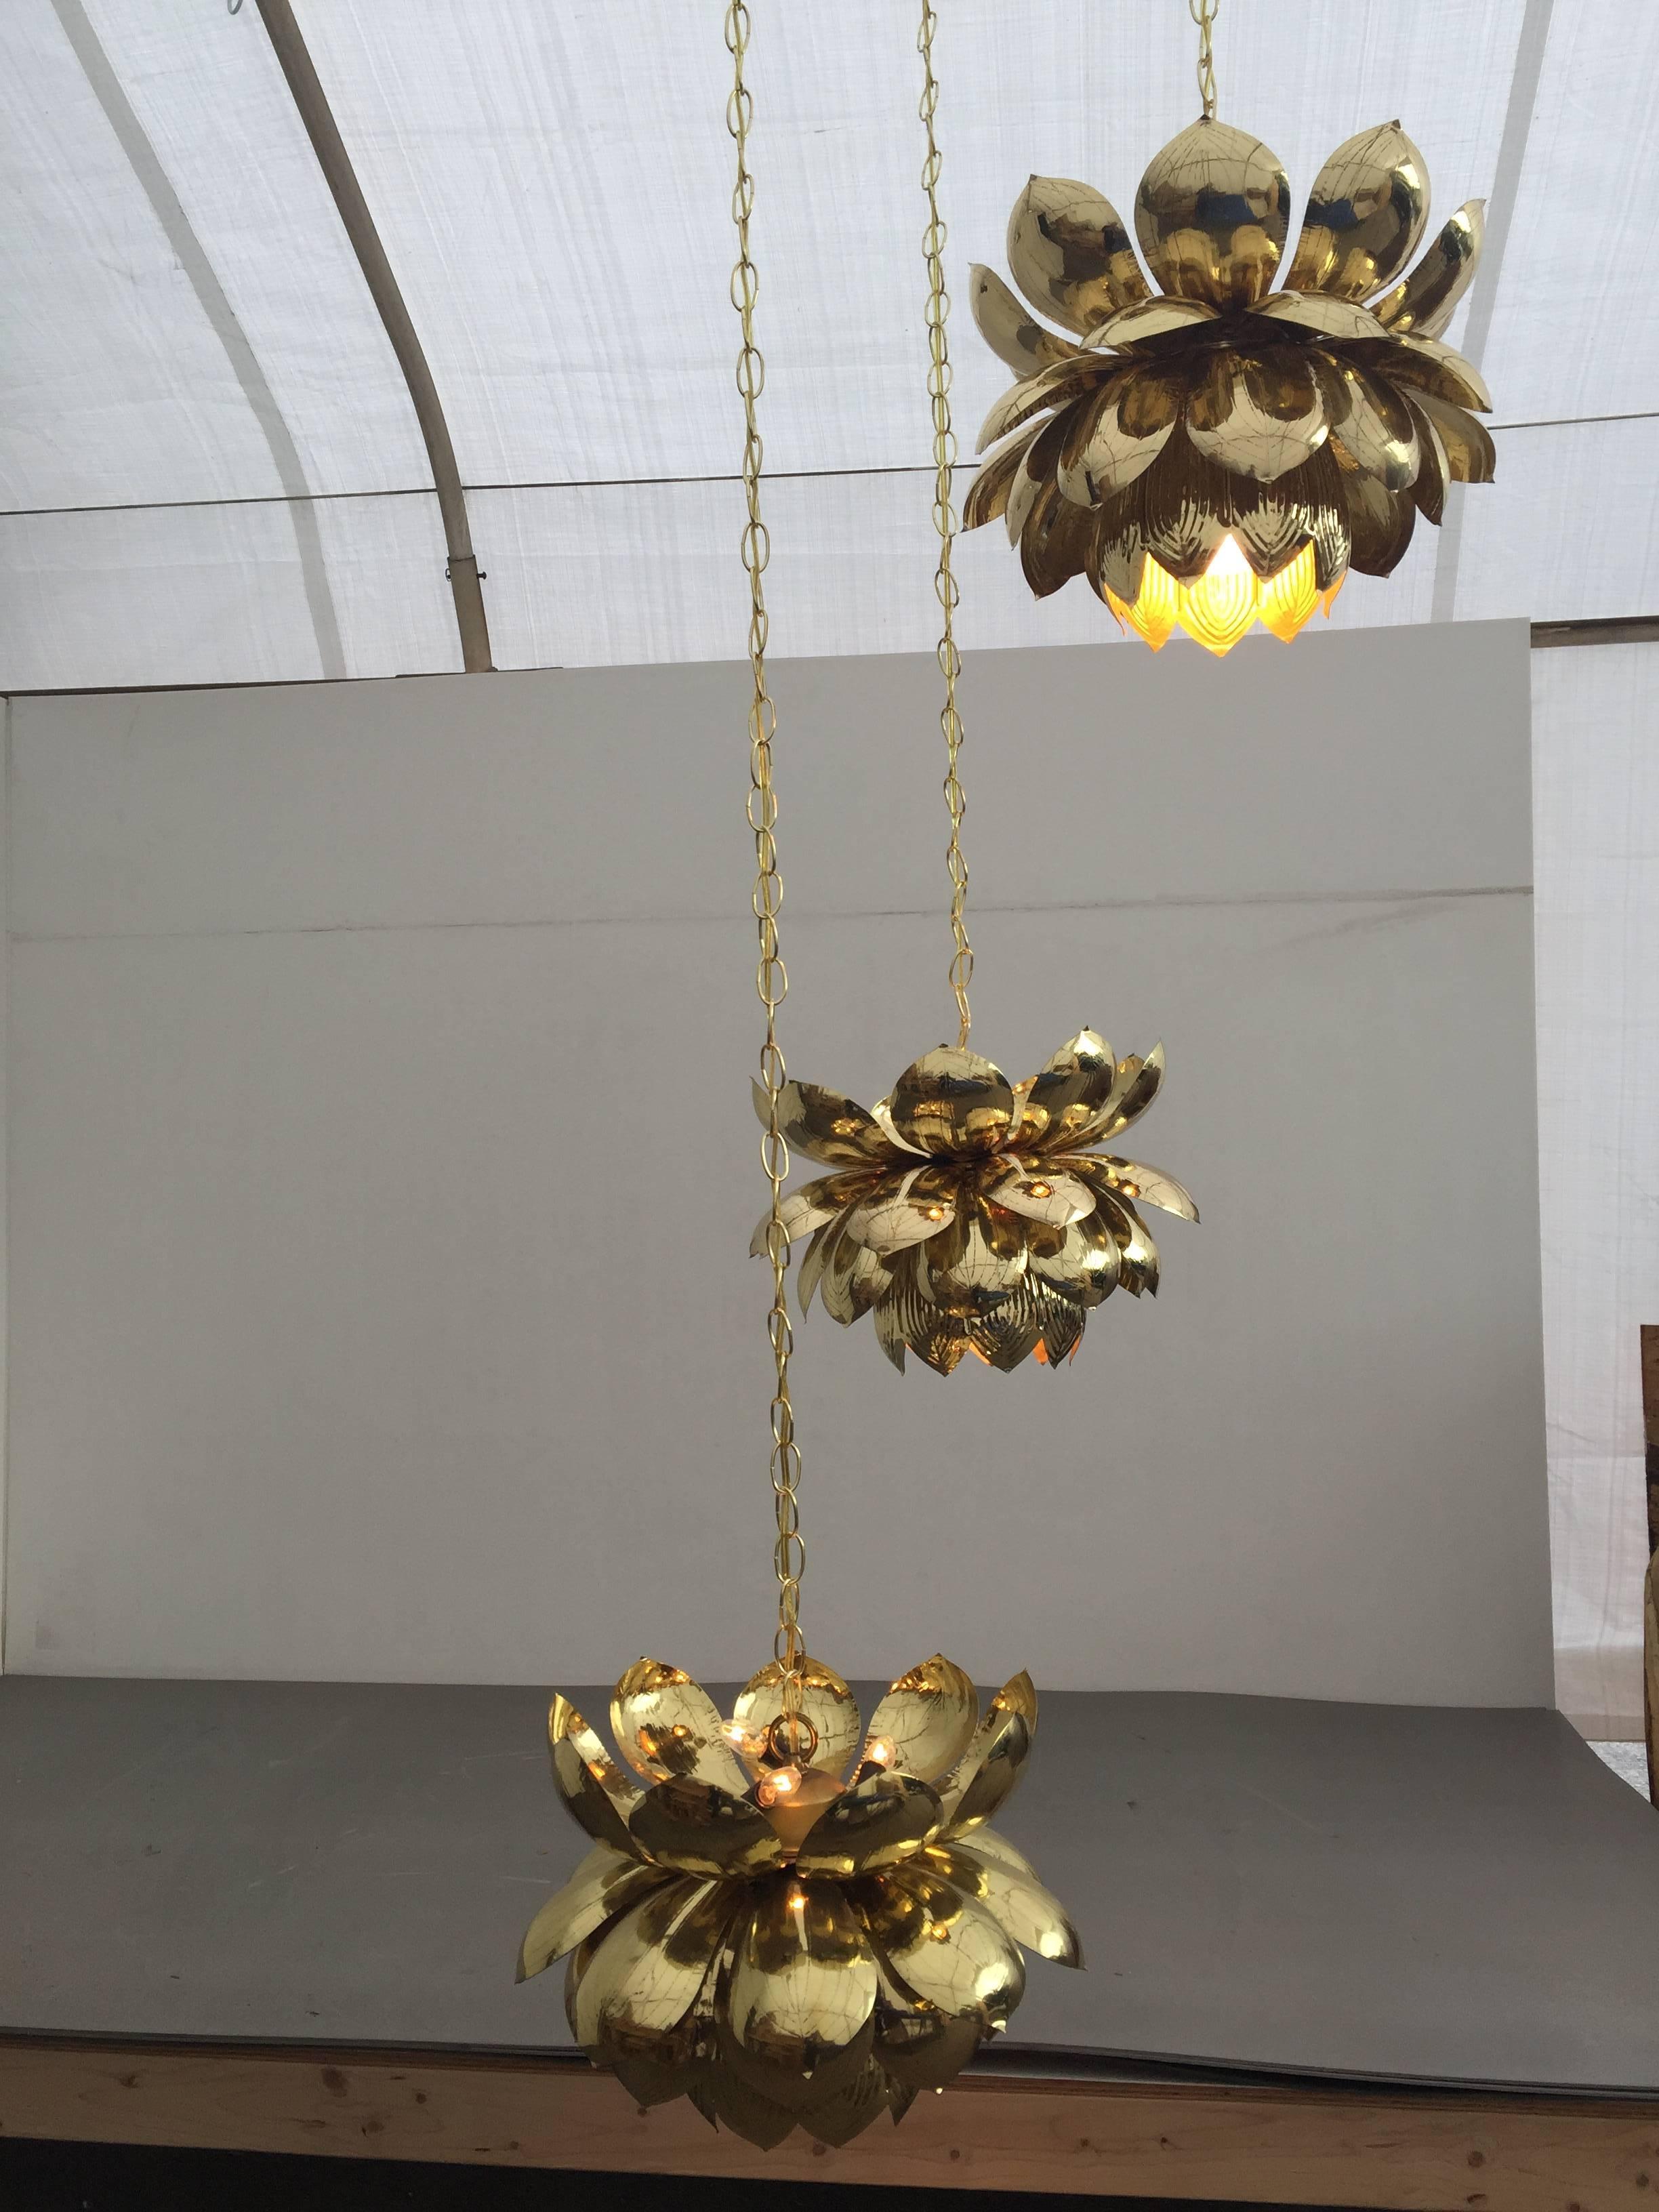 Absolutely stunning massive brass three large lotus chandelier by Feldman.
These chandeliers originally come in small lotus three and six pendants (we have six pendant version) We custom-made the brass ceiling plate and attached three original large